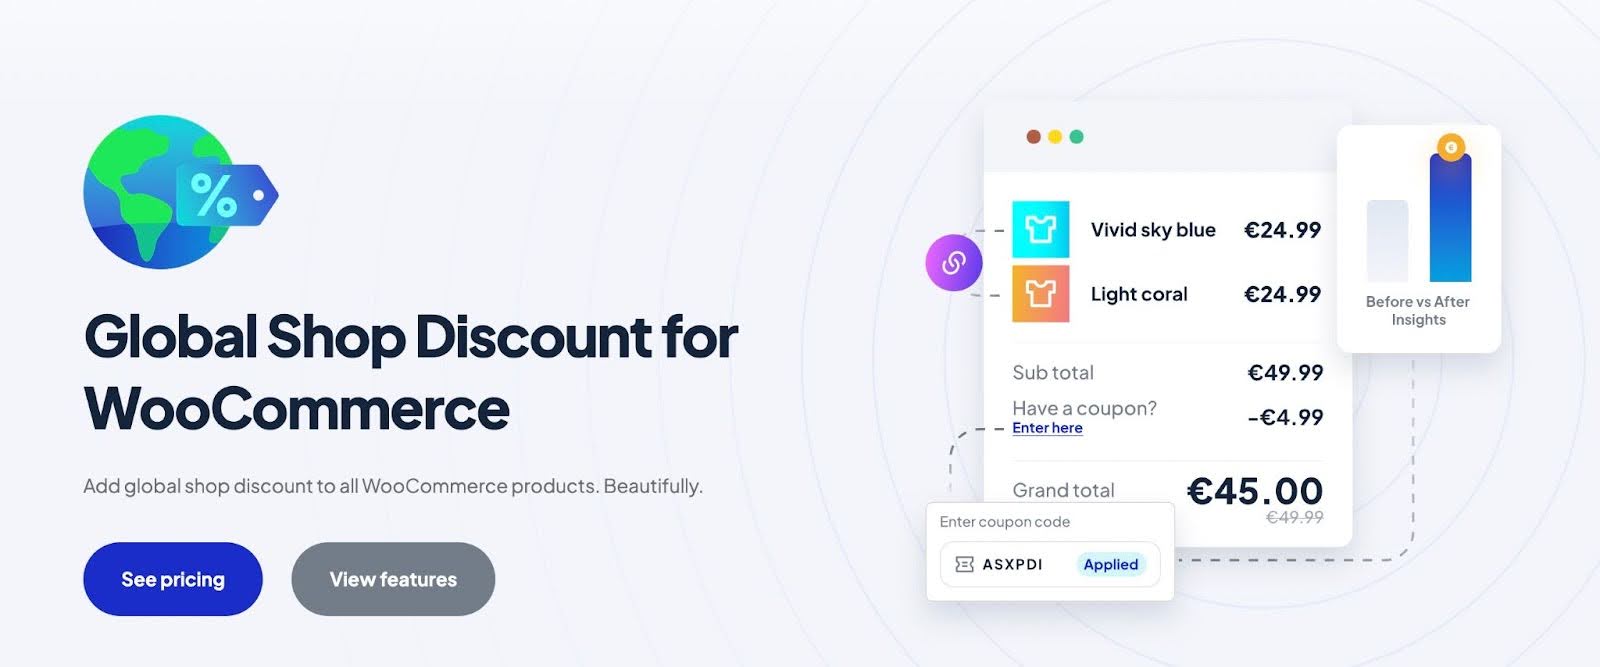 Global Shop Discount for WooCommerce